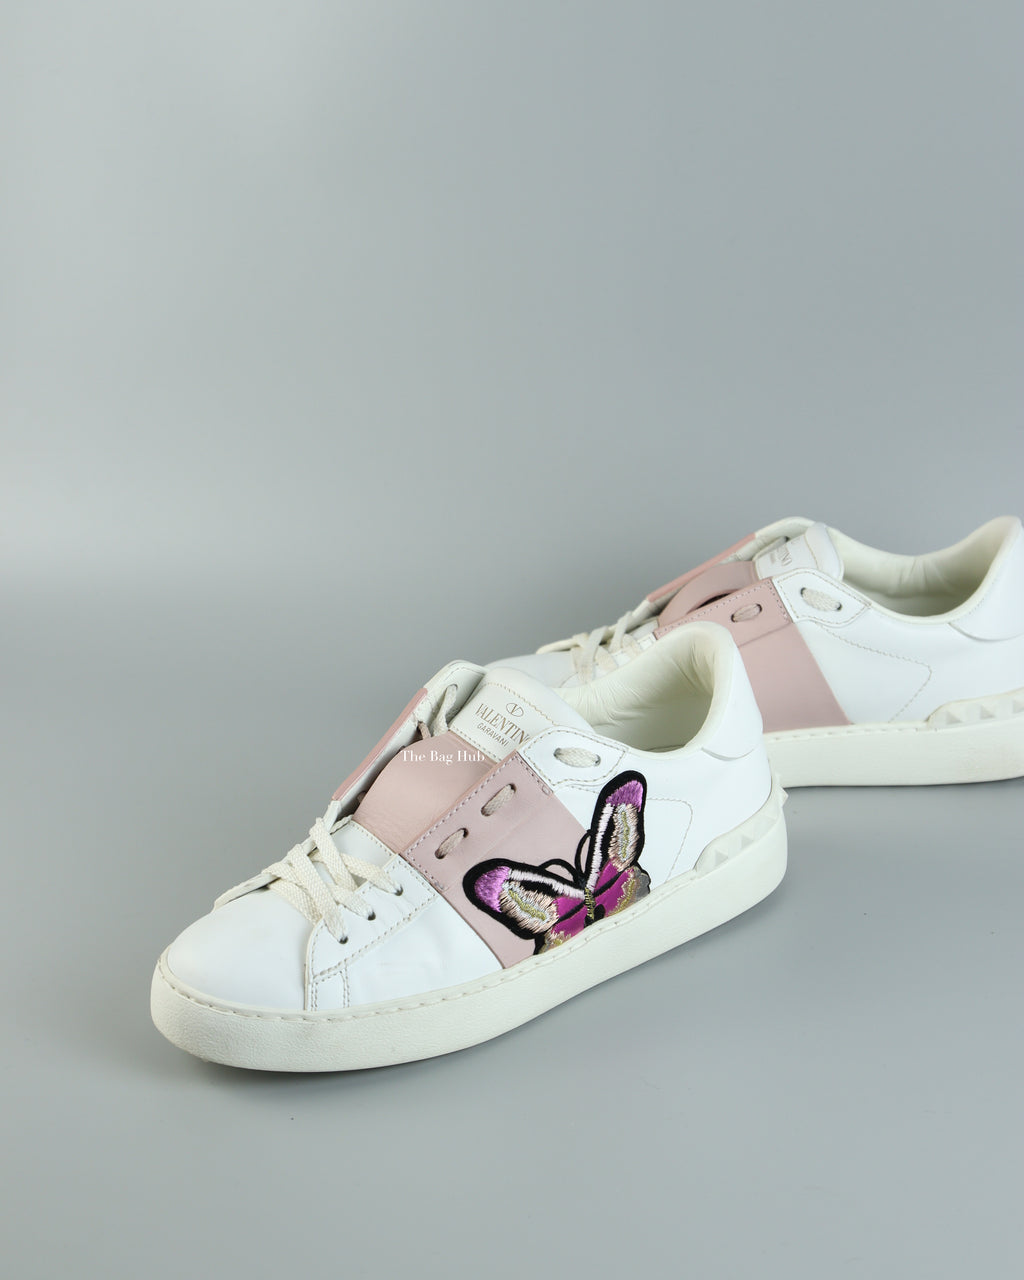 Valentino Garavani White/Pink Butterfly Embroidered Sneakers Size 36-1